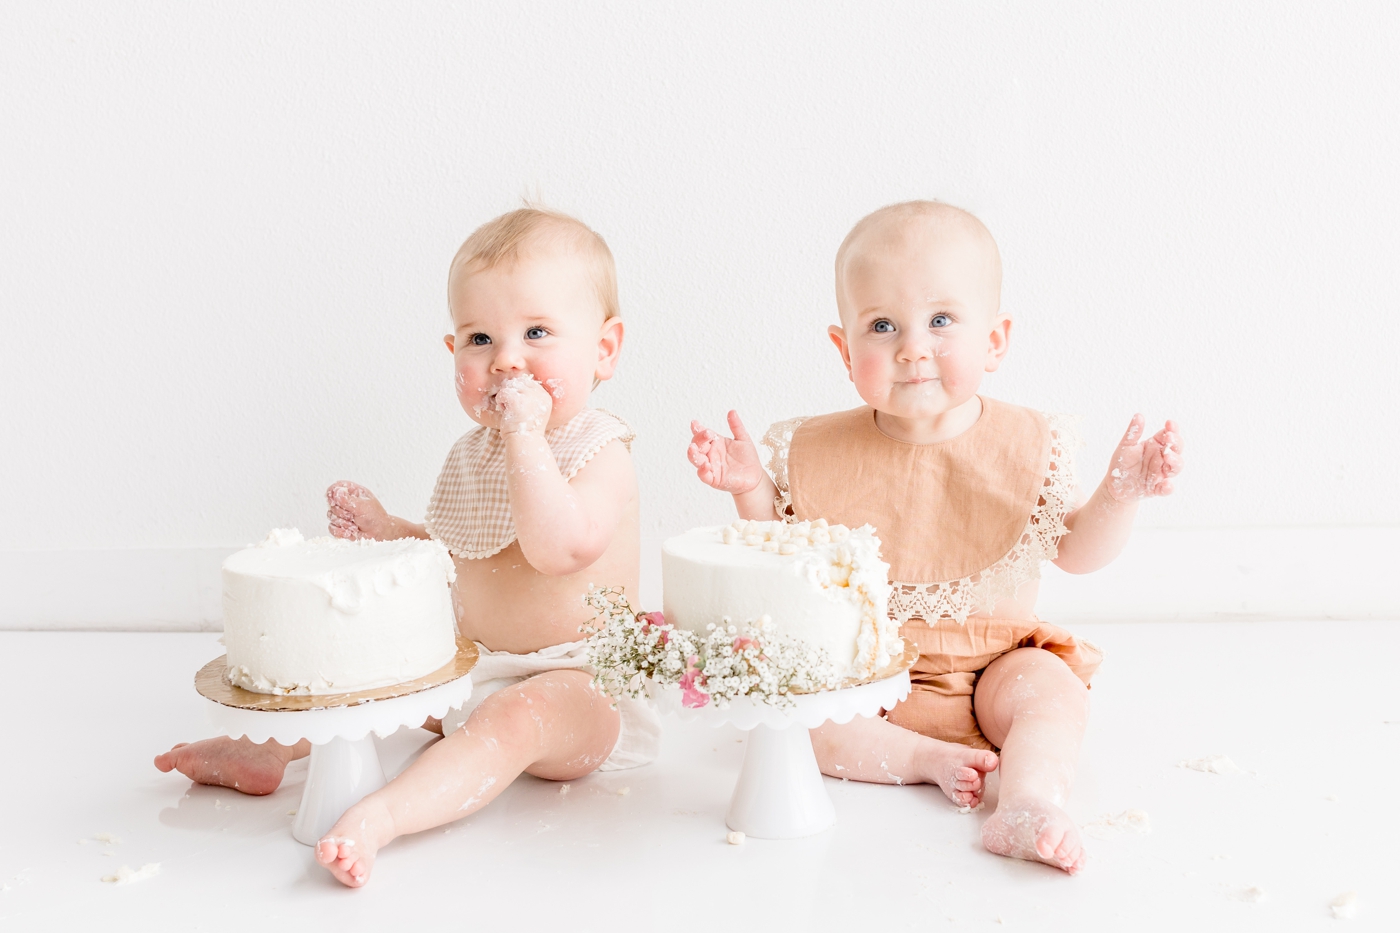 Twins smiling at camera during first birthday cake smash session. Photo by Austin family photographer, Sana Ahmed Photography.